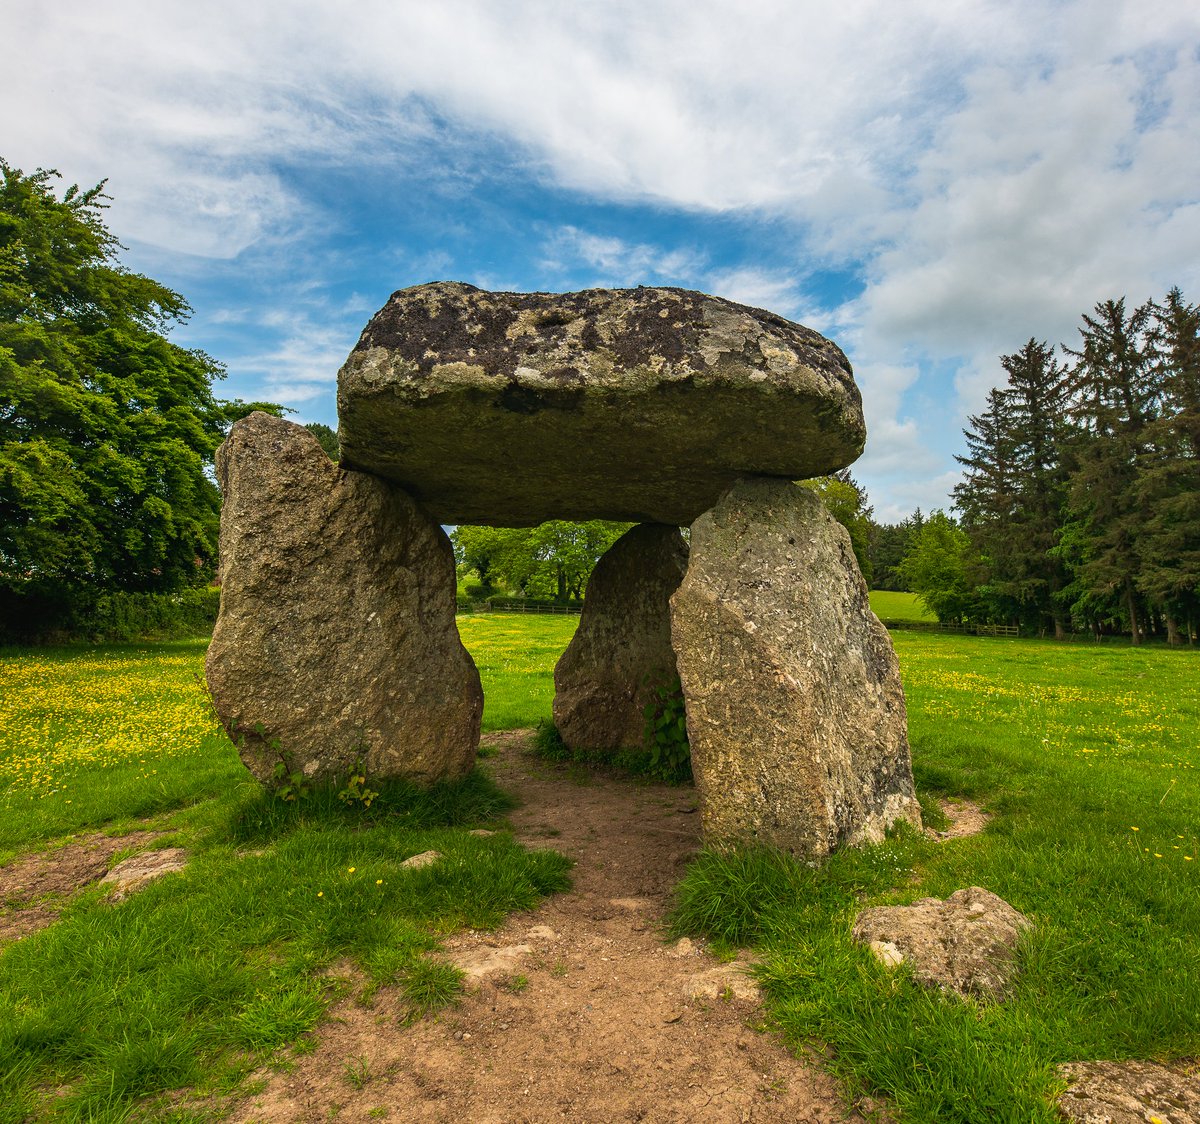 Spinsters Rock a Neolithic Dolmen located on the edge of Dartmoor #archaeology #Devon #Dartmoor